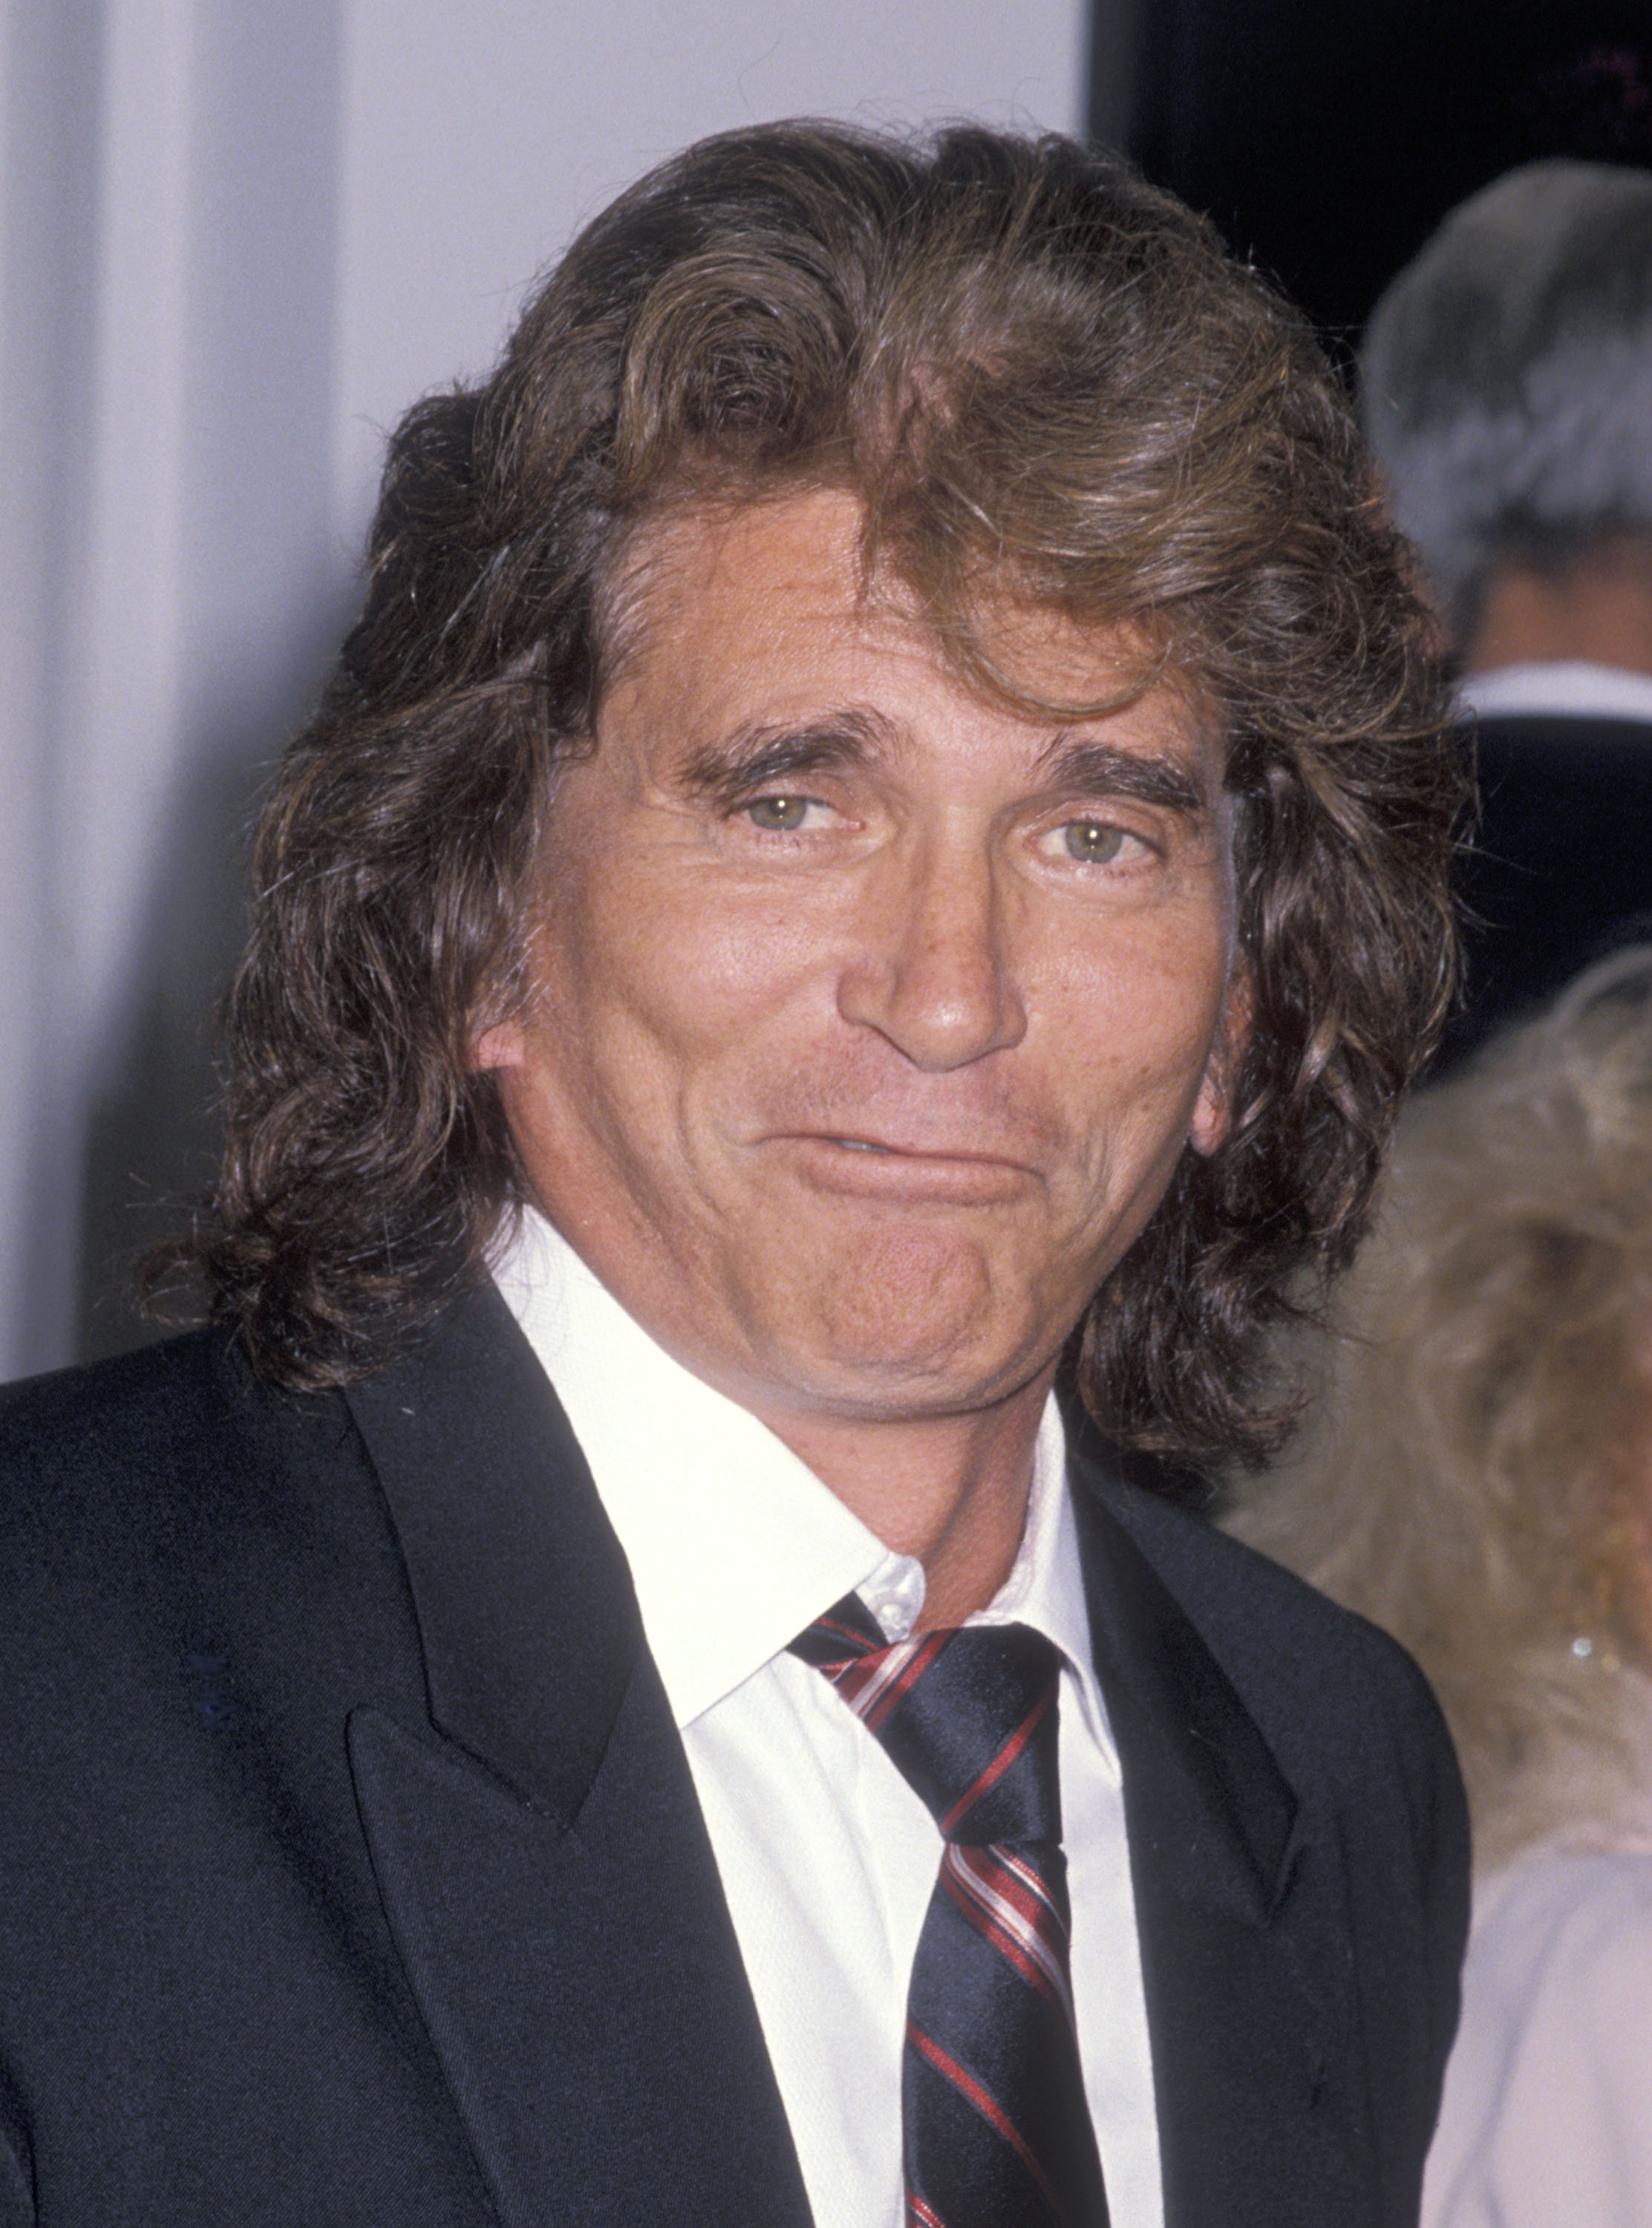 Michael Landon attends the Malibu Committee for Incorporation's "The Tides of March" - The First and Last Annual Malibu Right to Vote Party on March 17, 1990, at a Private Residence in Malibu, California. | Source: Getty Images